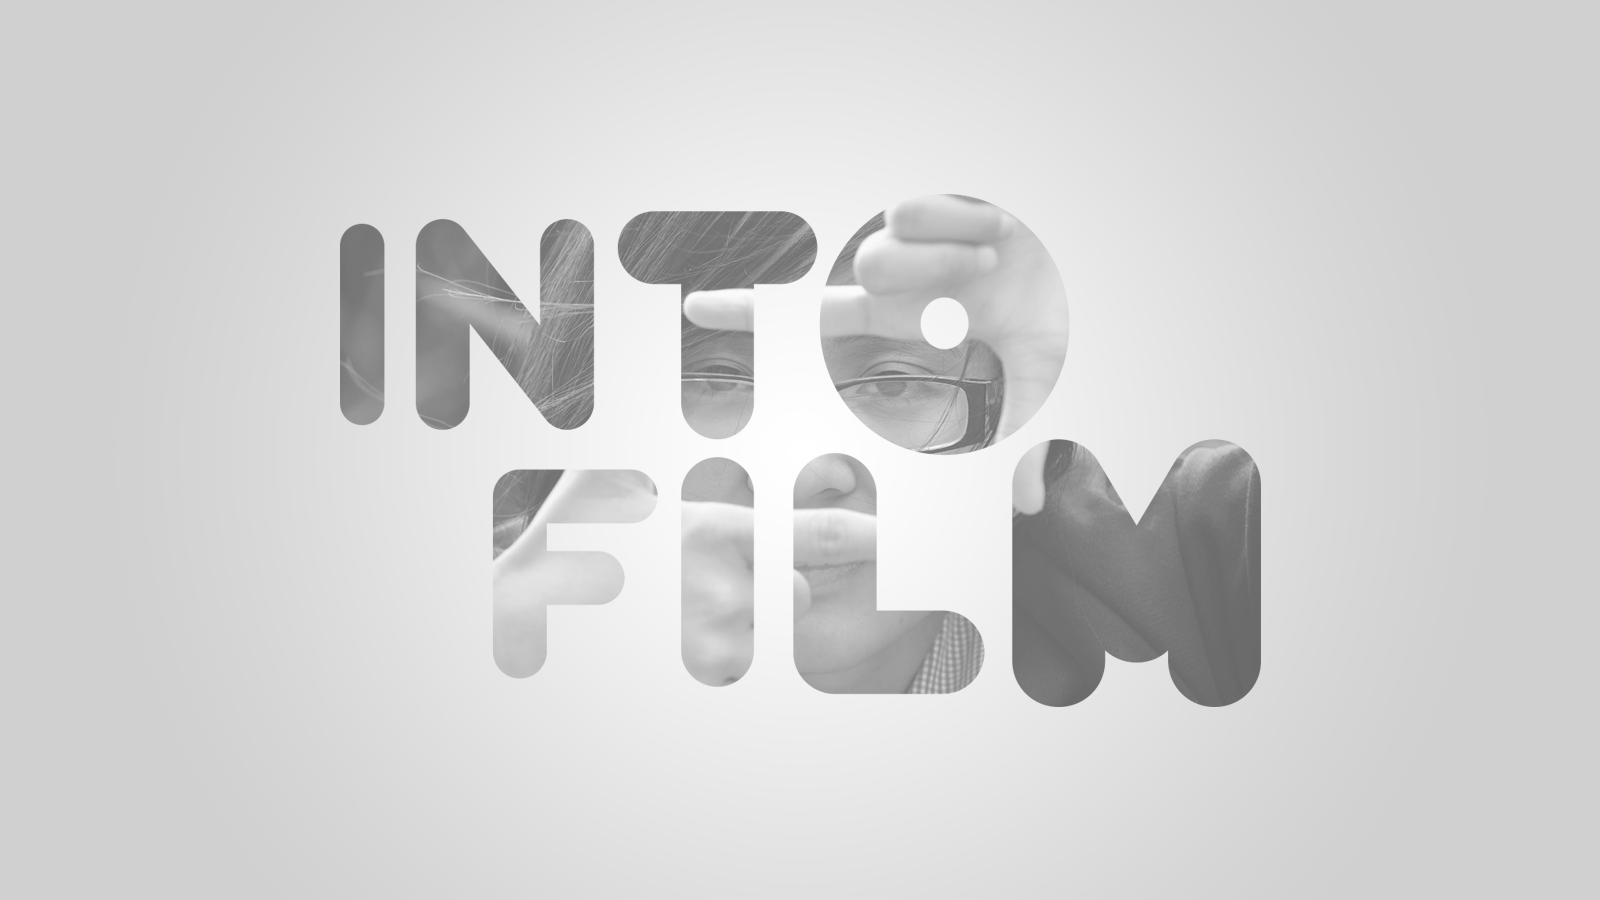 About The Into Film Festival